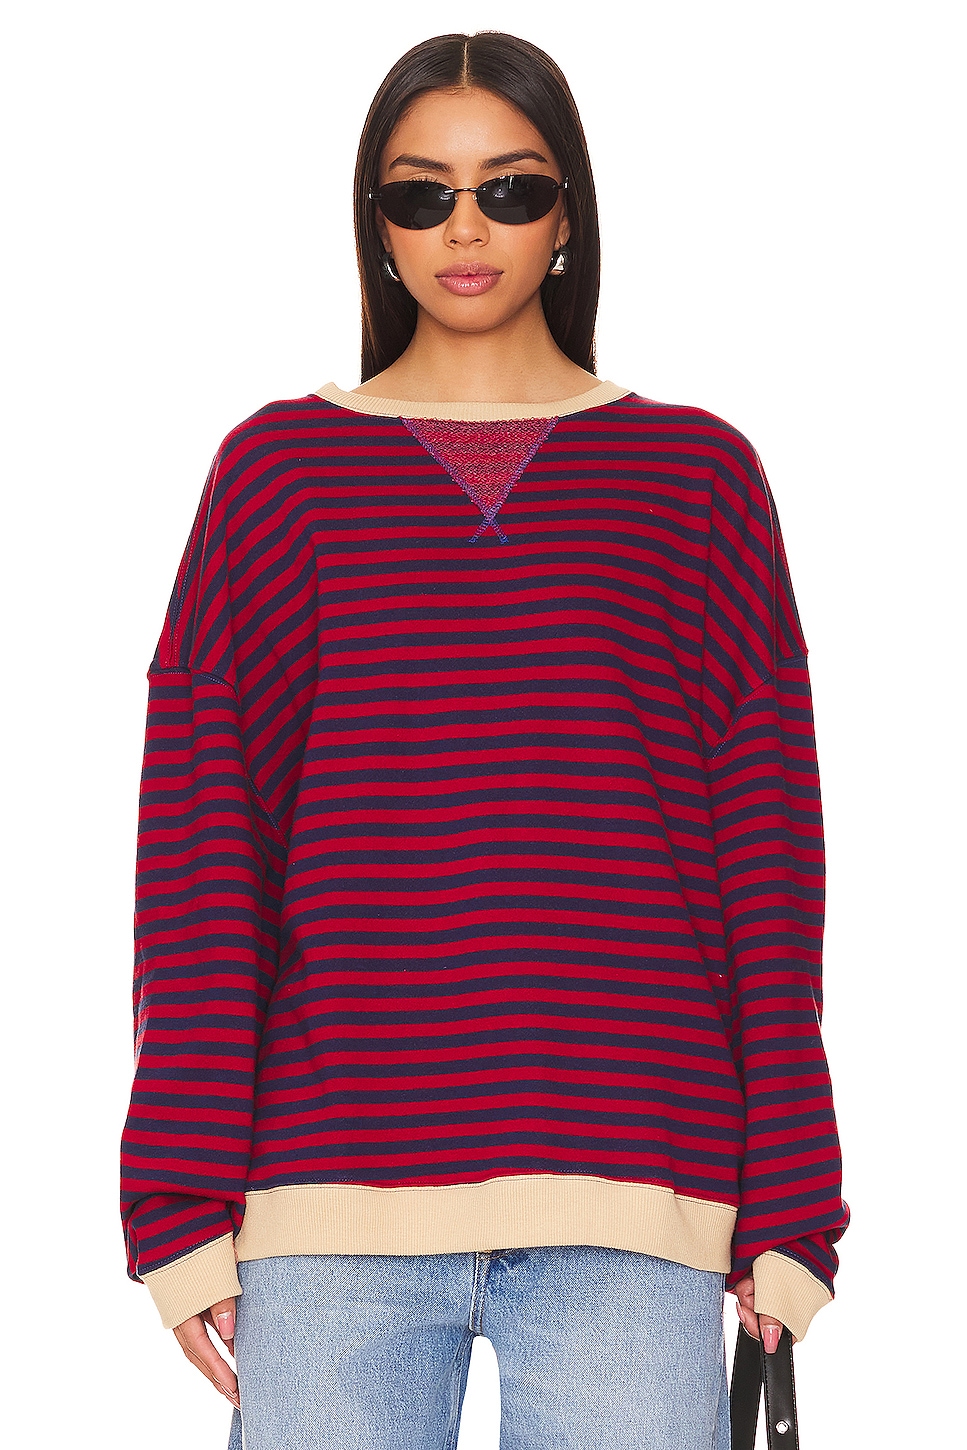 Free People Classic Striped Crew in Nautical Combo | REVOLVE